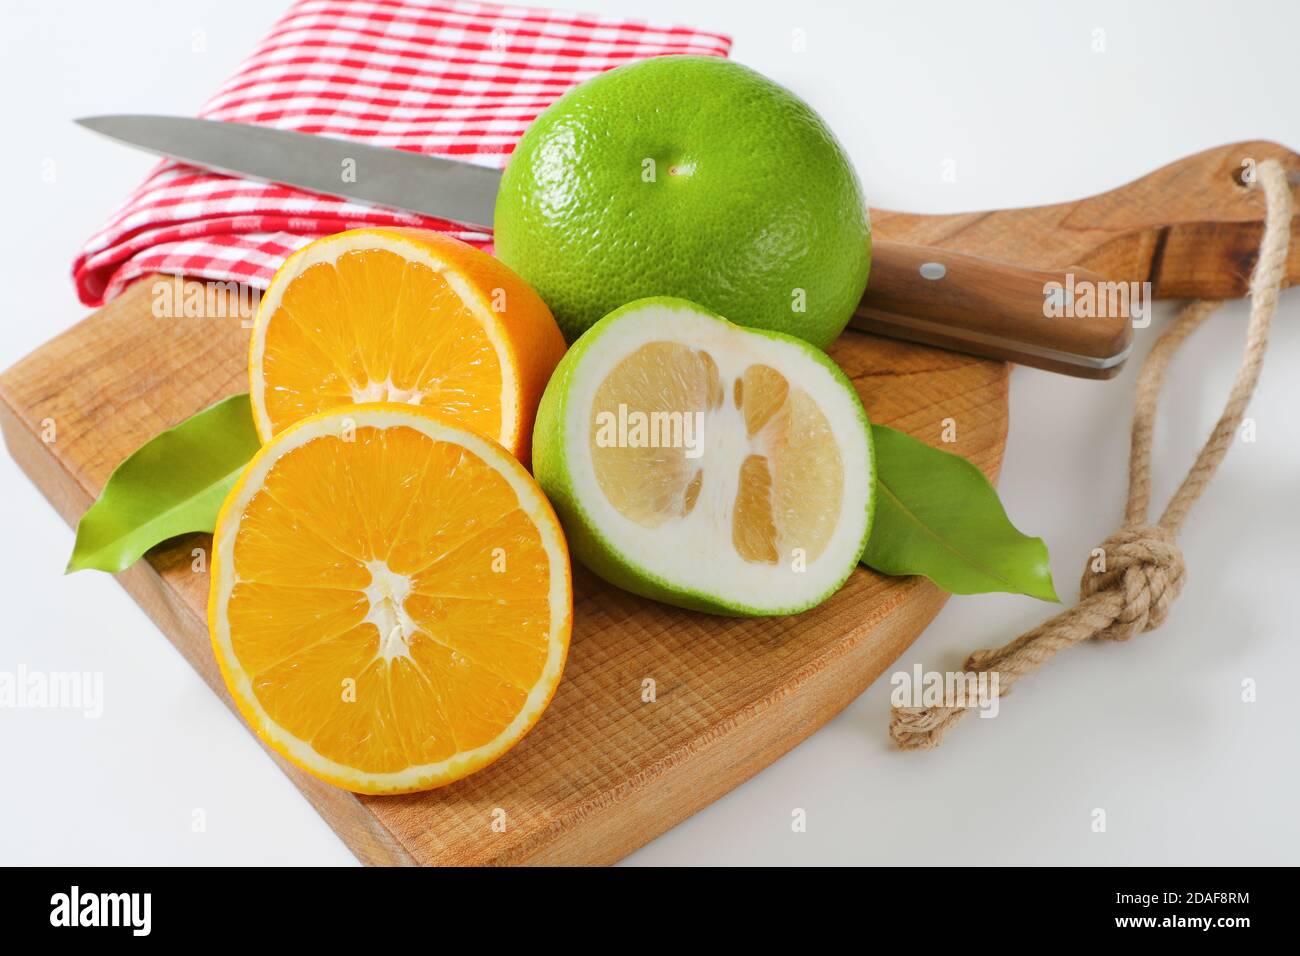 Still life of green grapefruits (sweetie, pomelit, oroblanco grapefruit) and halved orange with knife and tea towel on cutting board Stock Photo